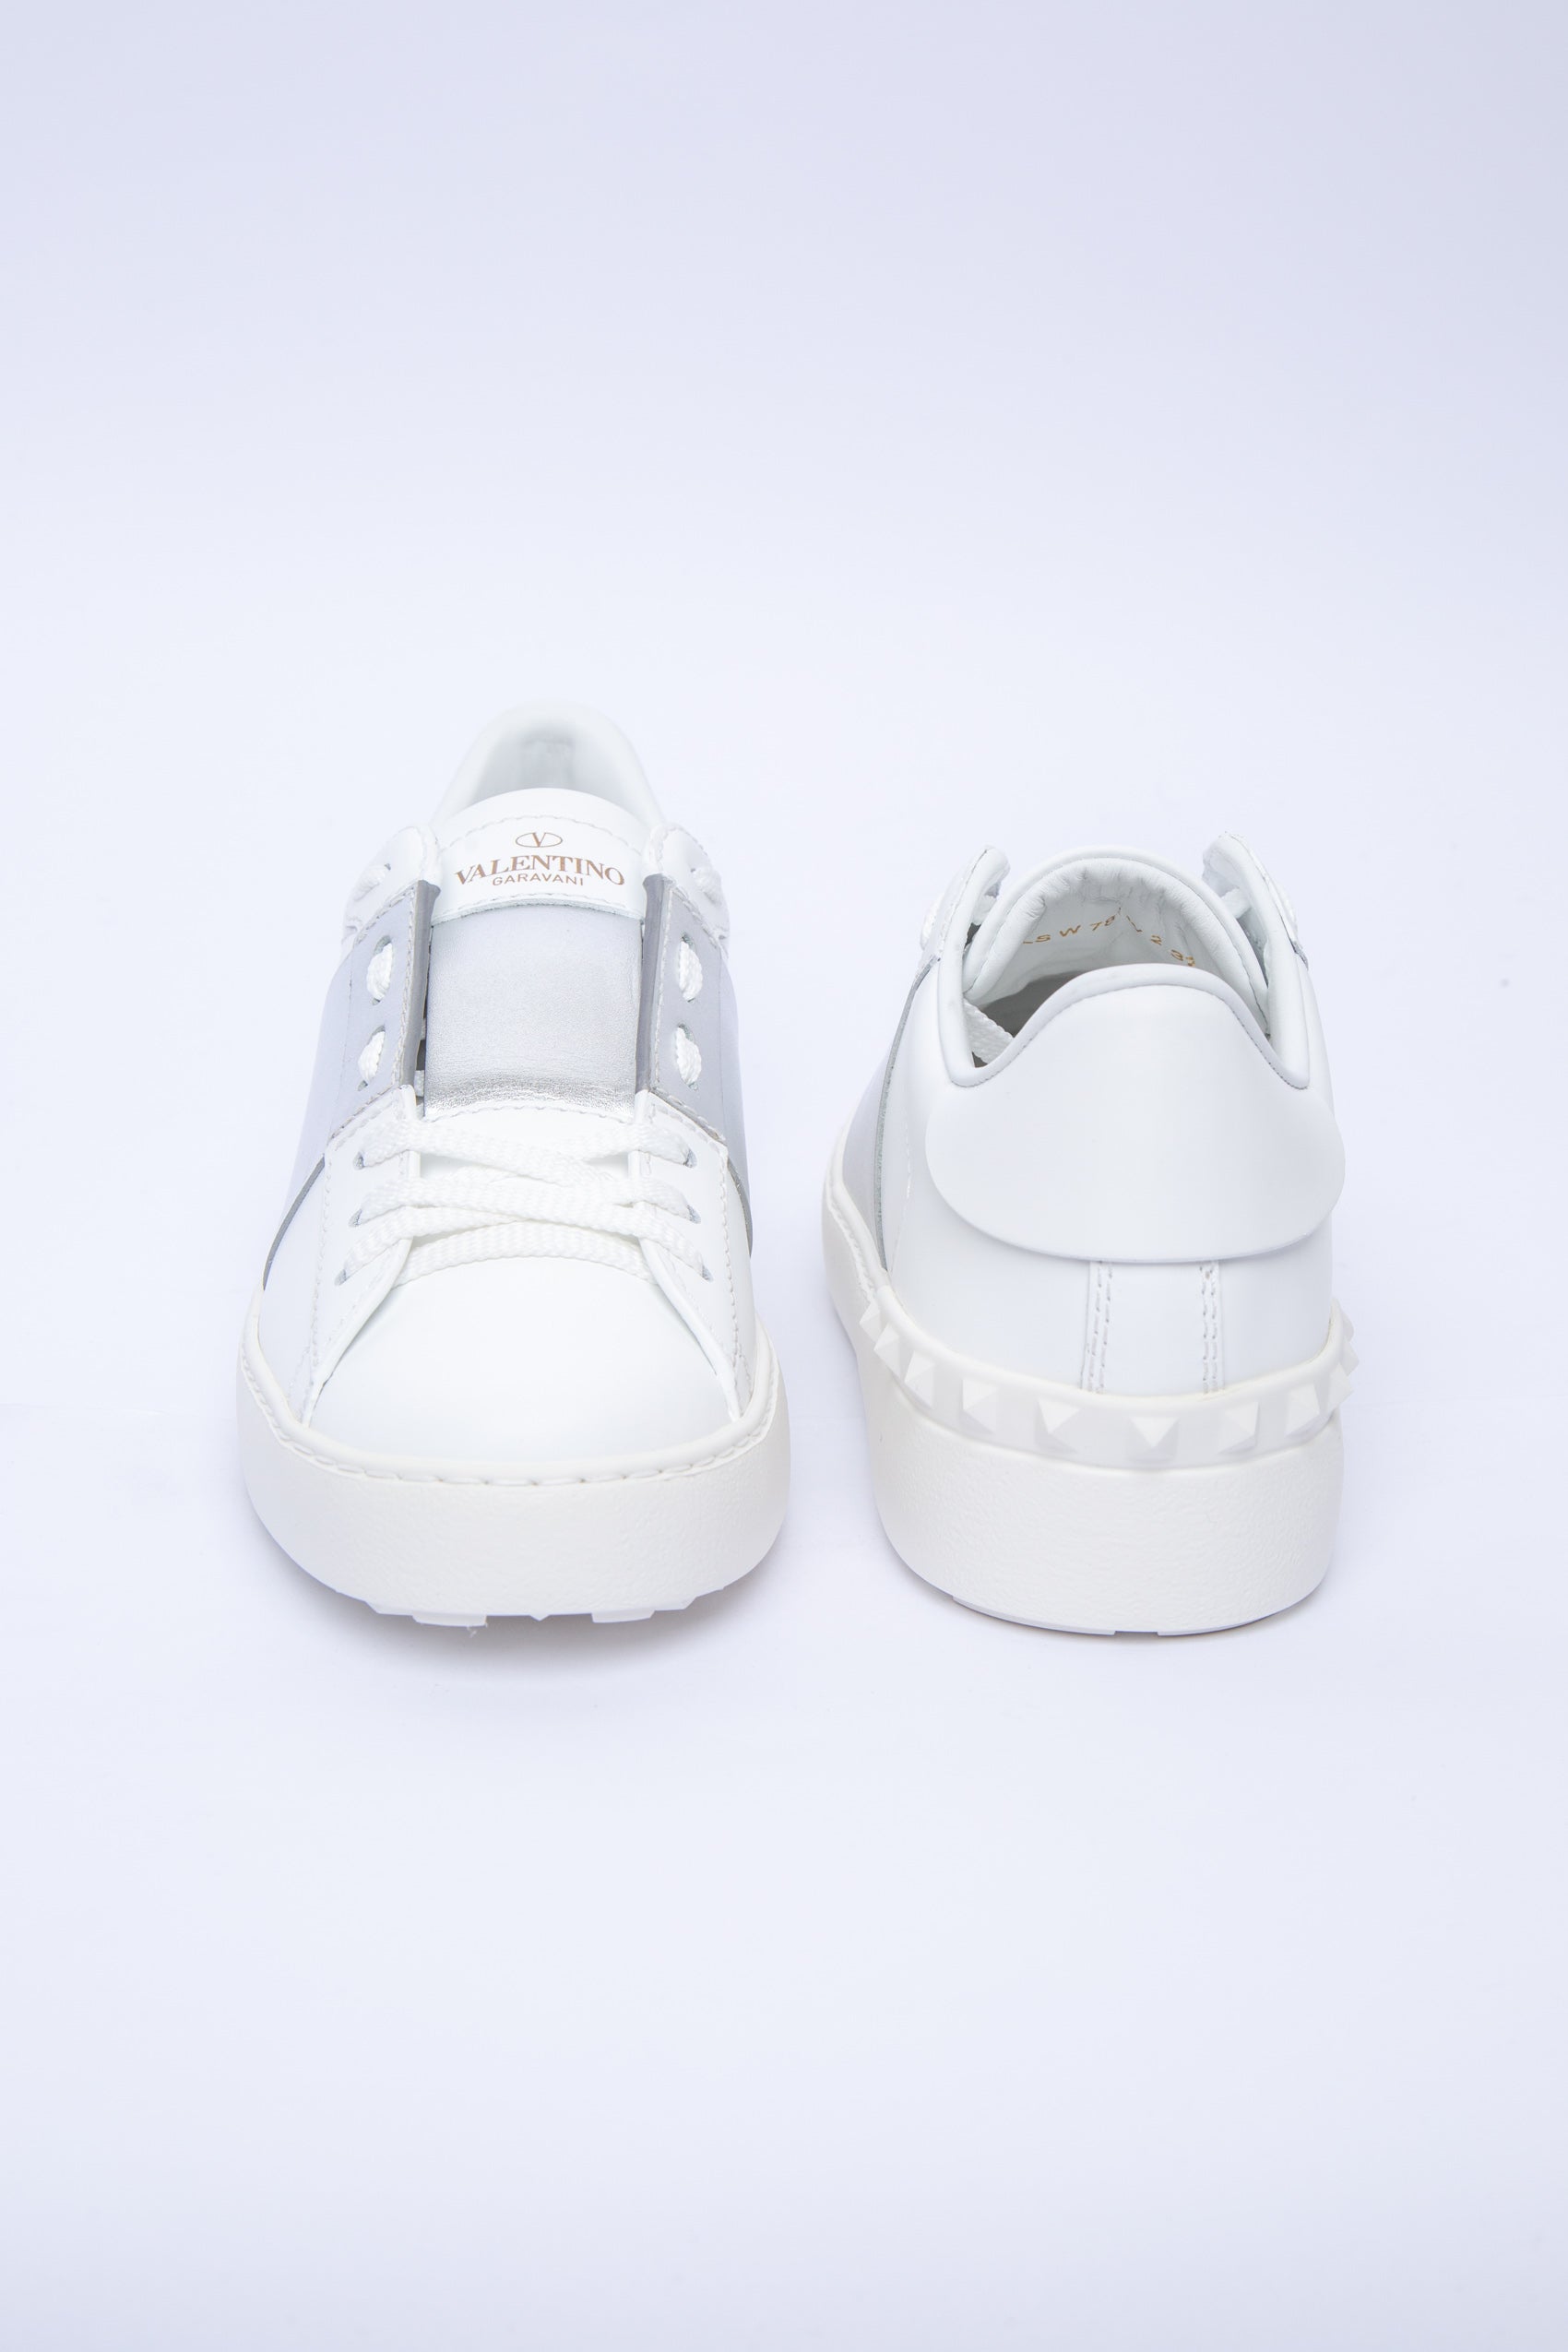 VALENTINO Sneakers with contrasting band